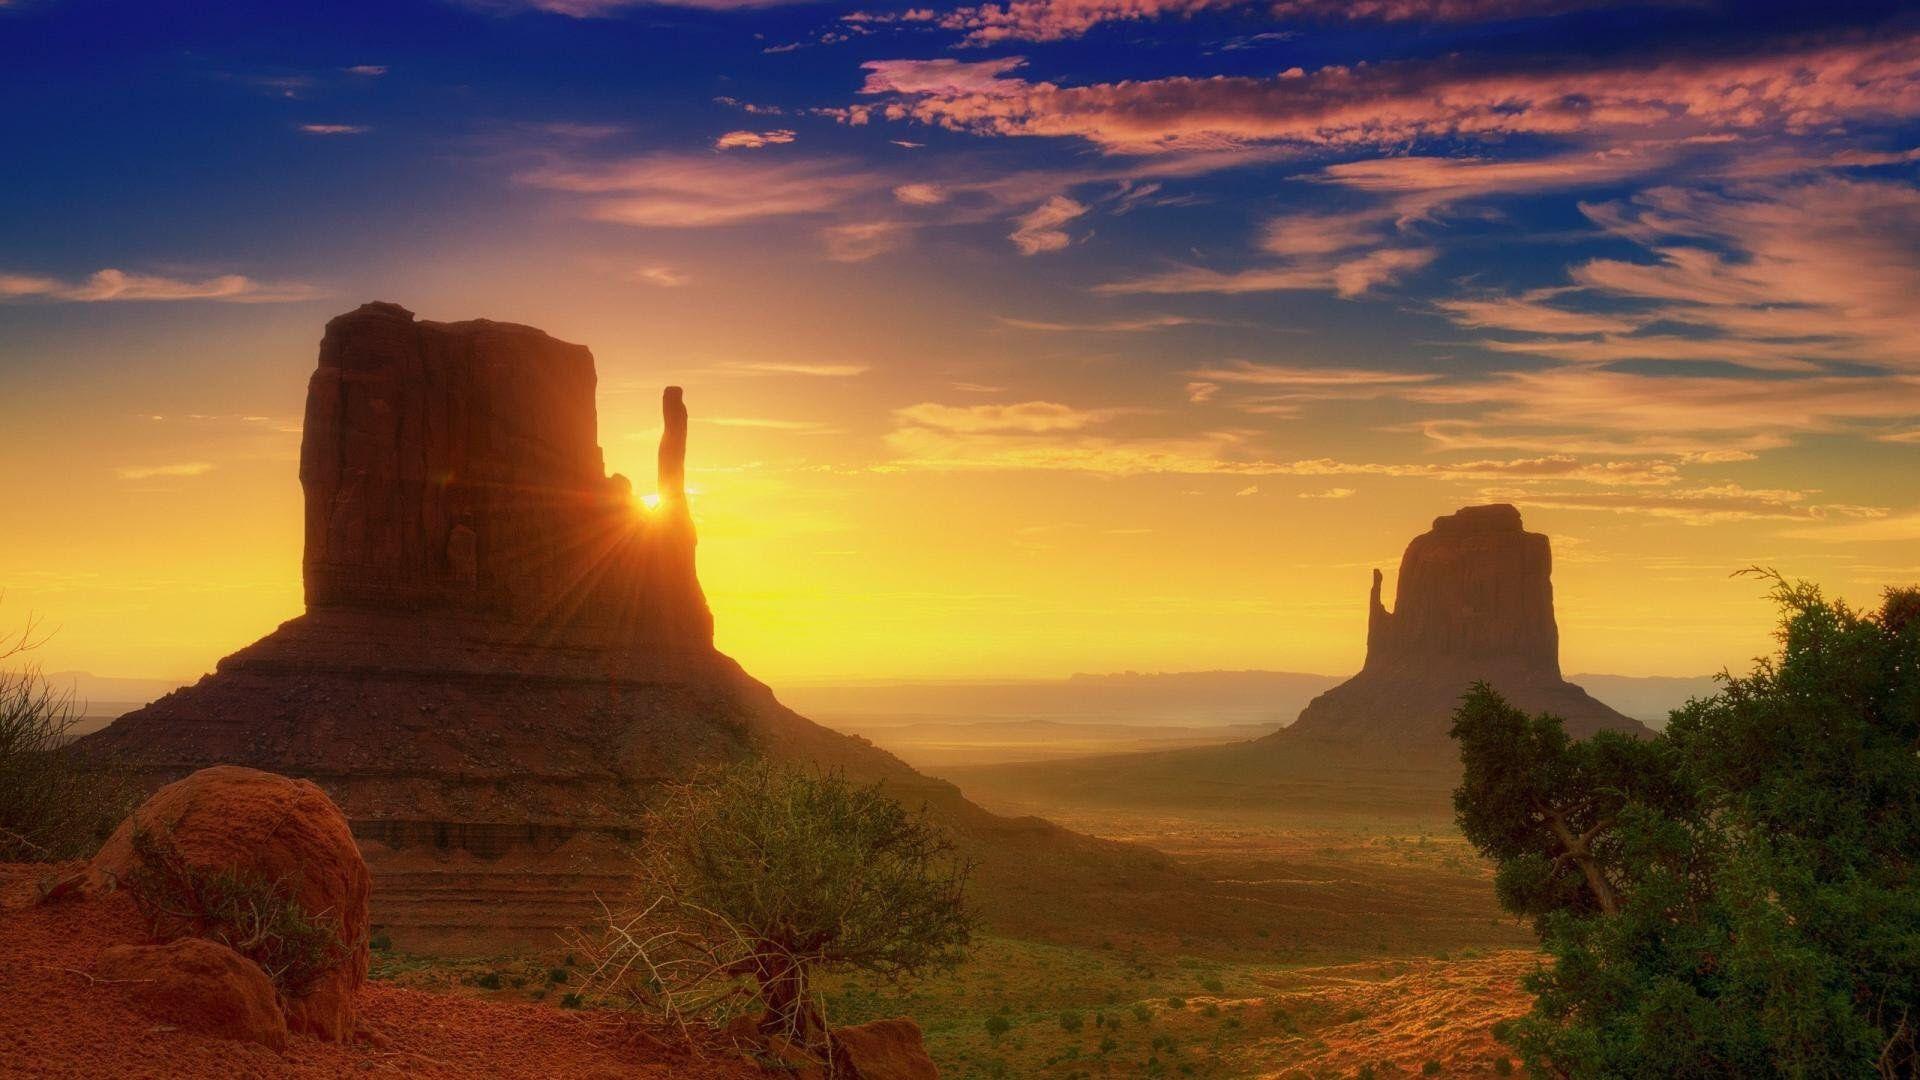 Wallpaper.wiki Sunset Grand Canyon Background PIC WPB0012686